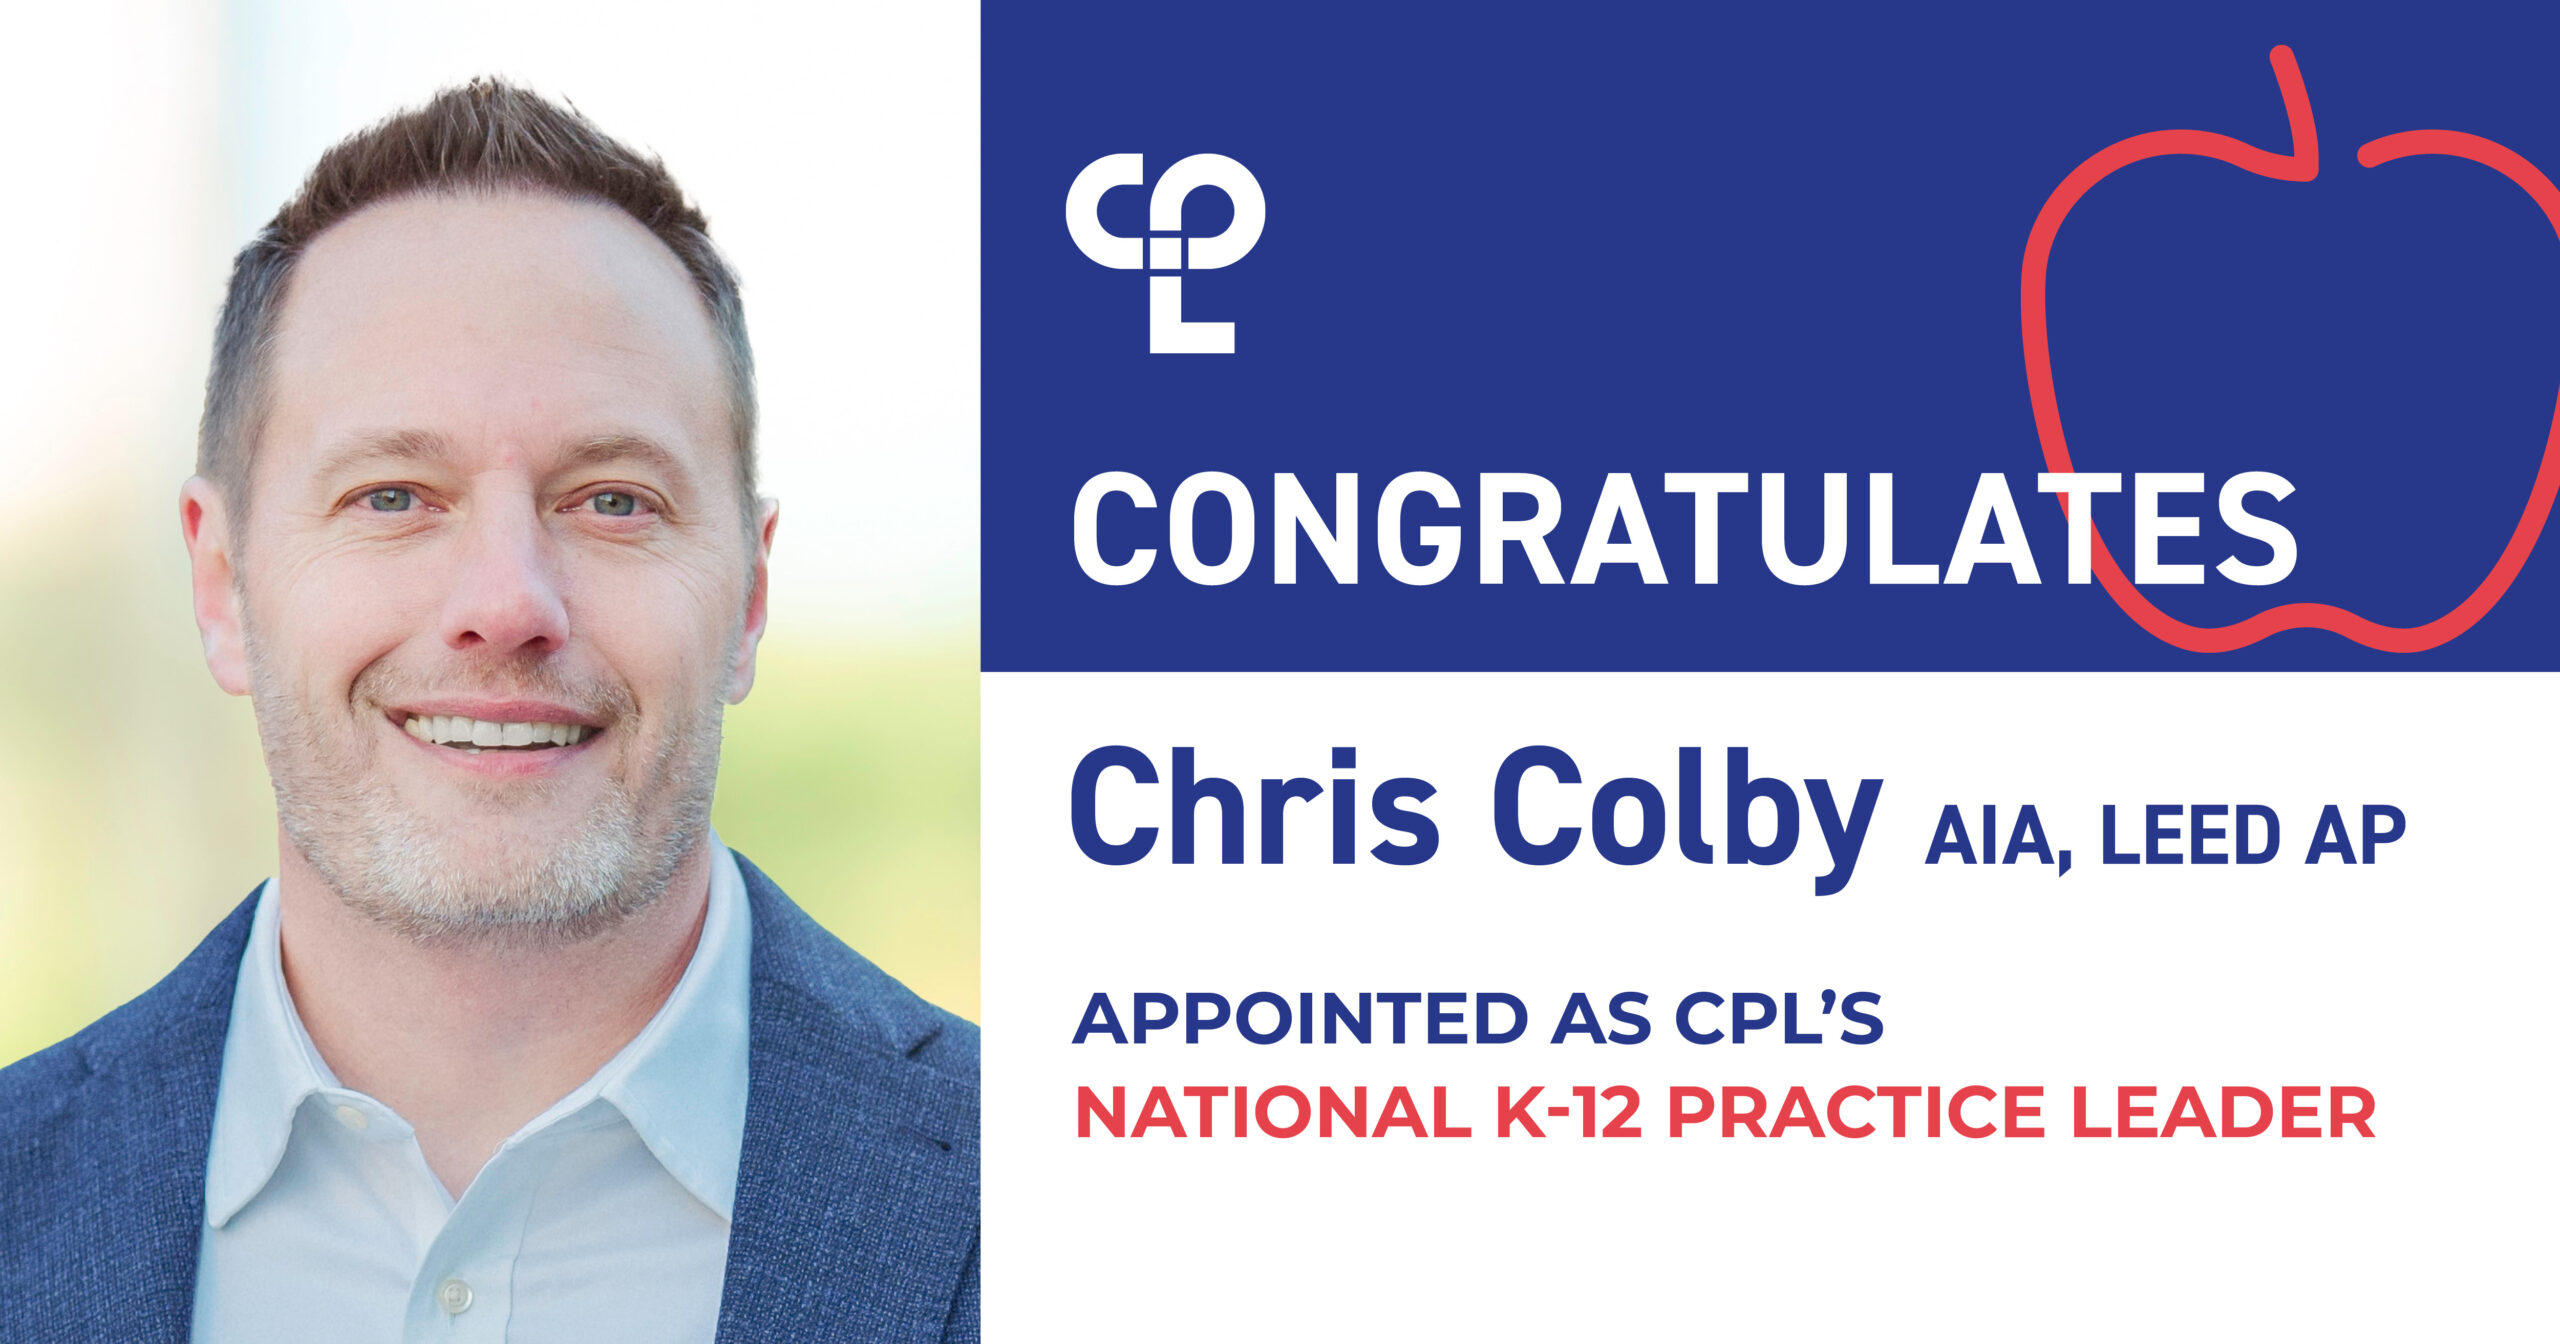 Graphic shows a headshot of Chris Colby on the left. On the right it reads "CPL Congratulates Chris Colby AIA, LEED AP - Appointed as CPL's National K-12 Practice Leader"